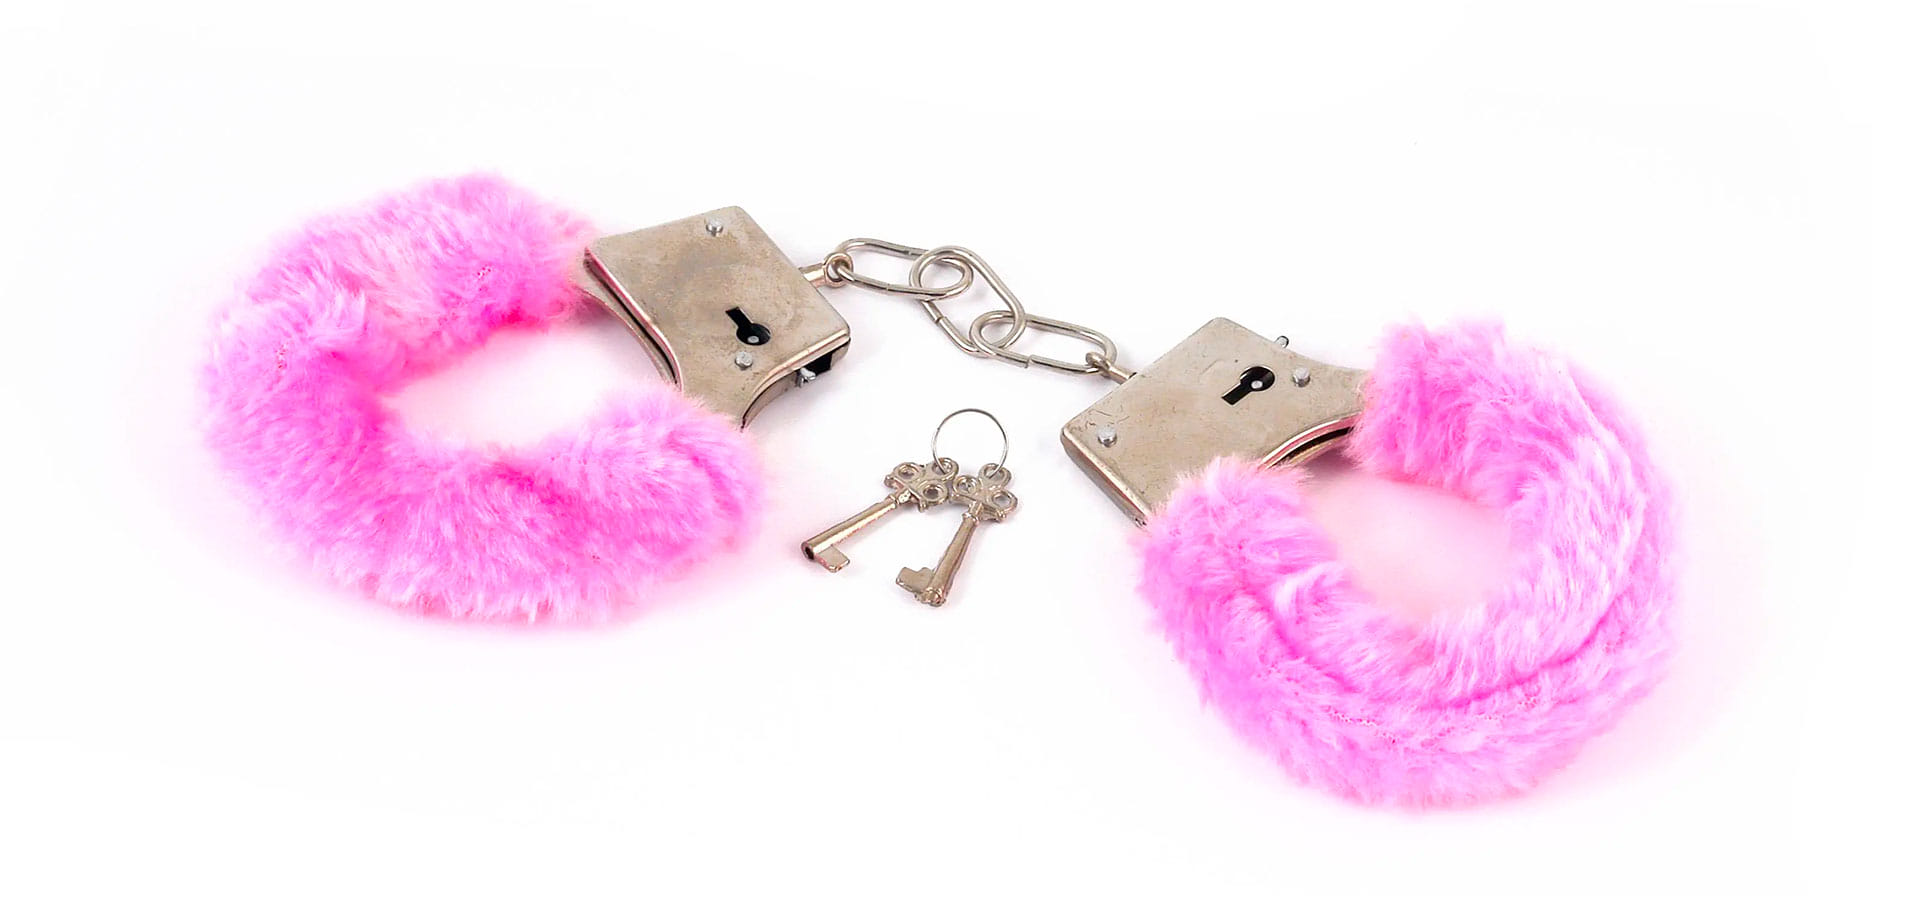 Furry Sex Handcuffs and Keys.